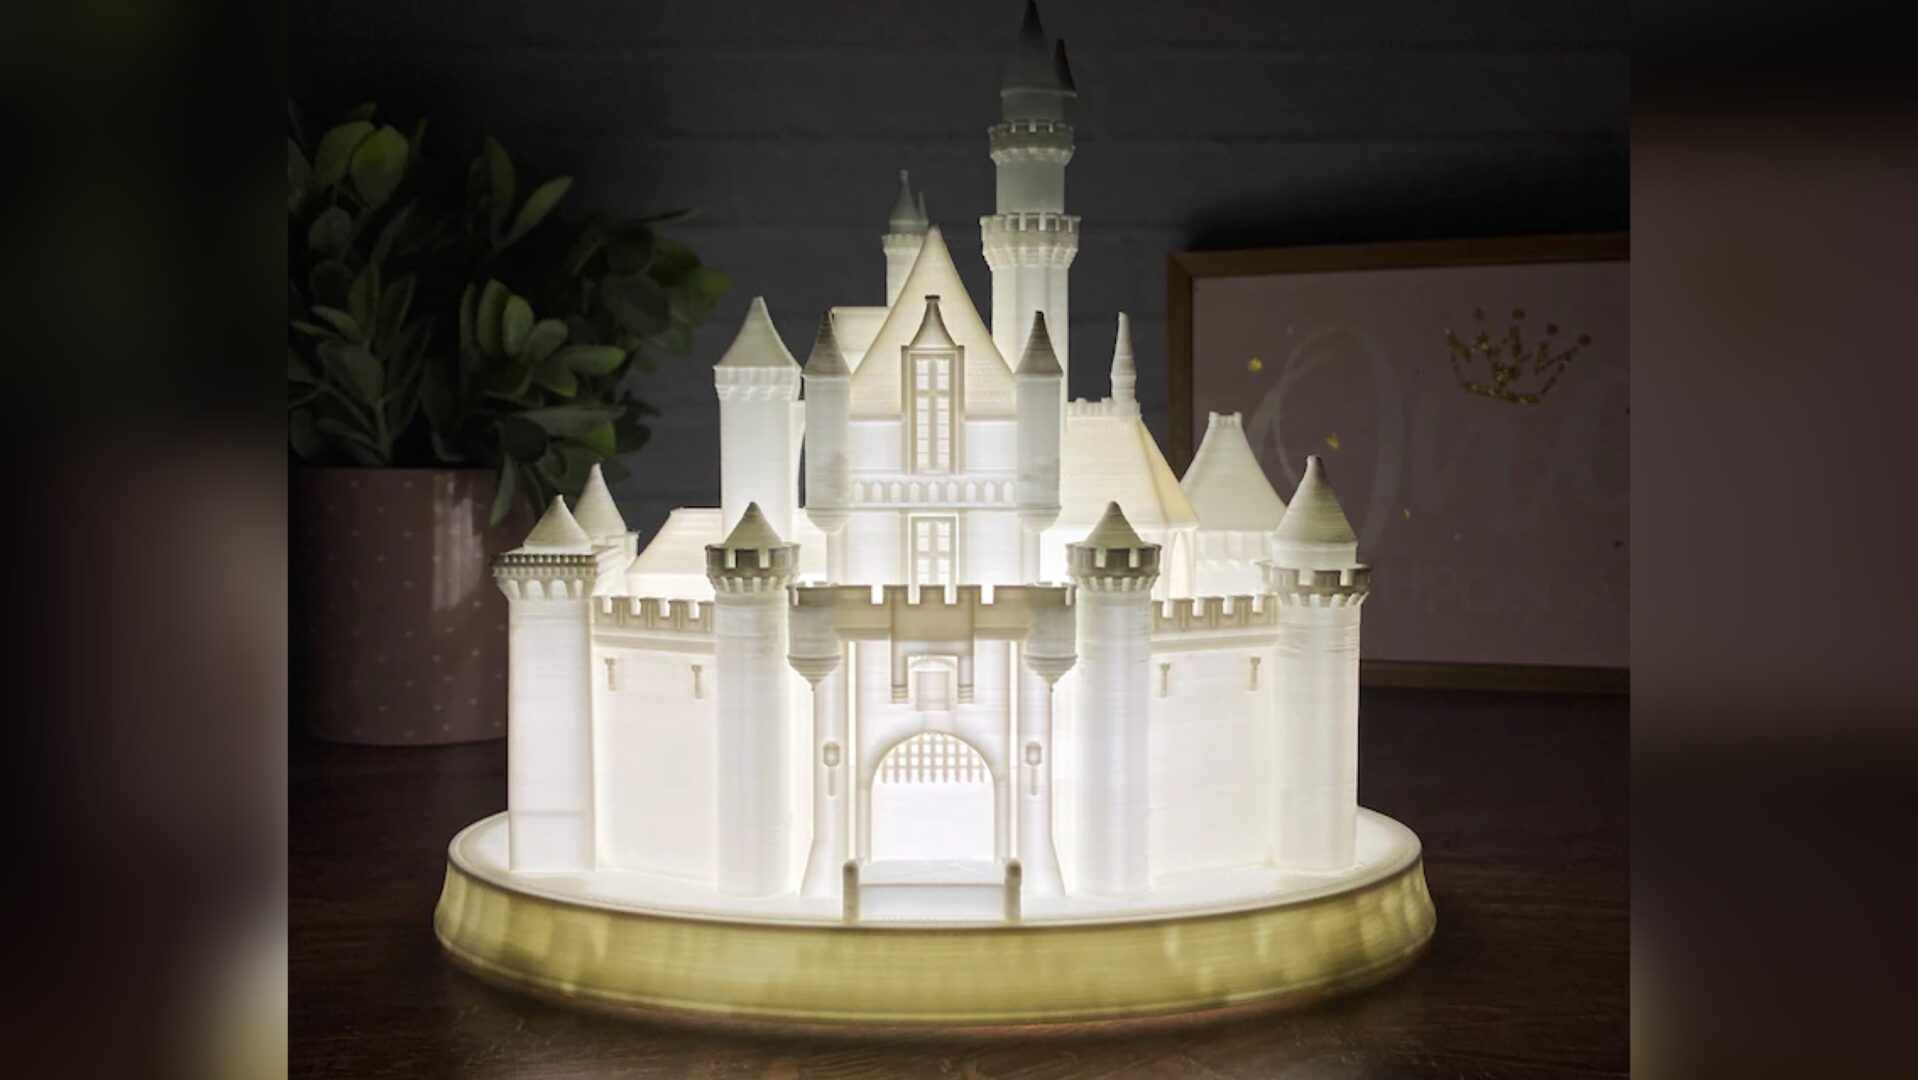 Light Up Your Room With This Sleeping Beauty Castle Lamp!